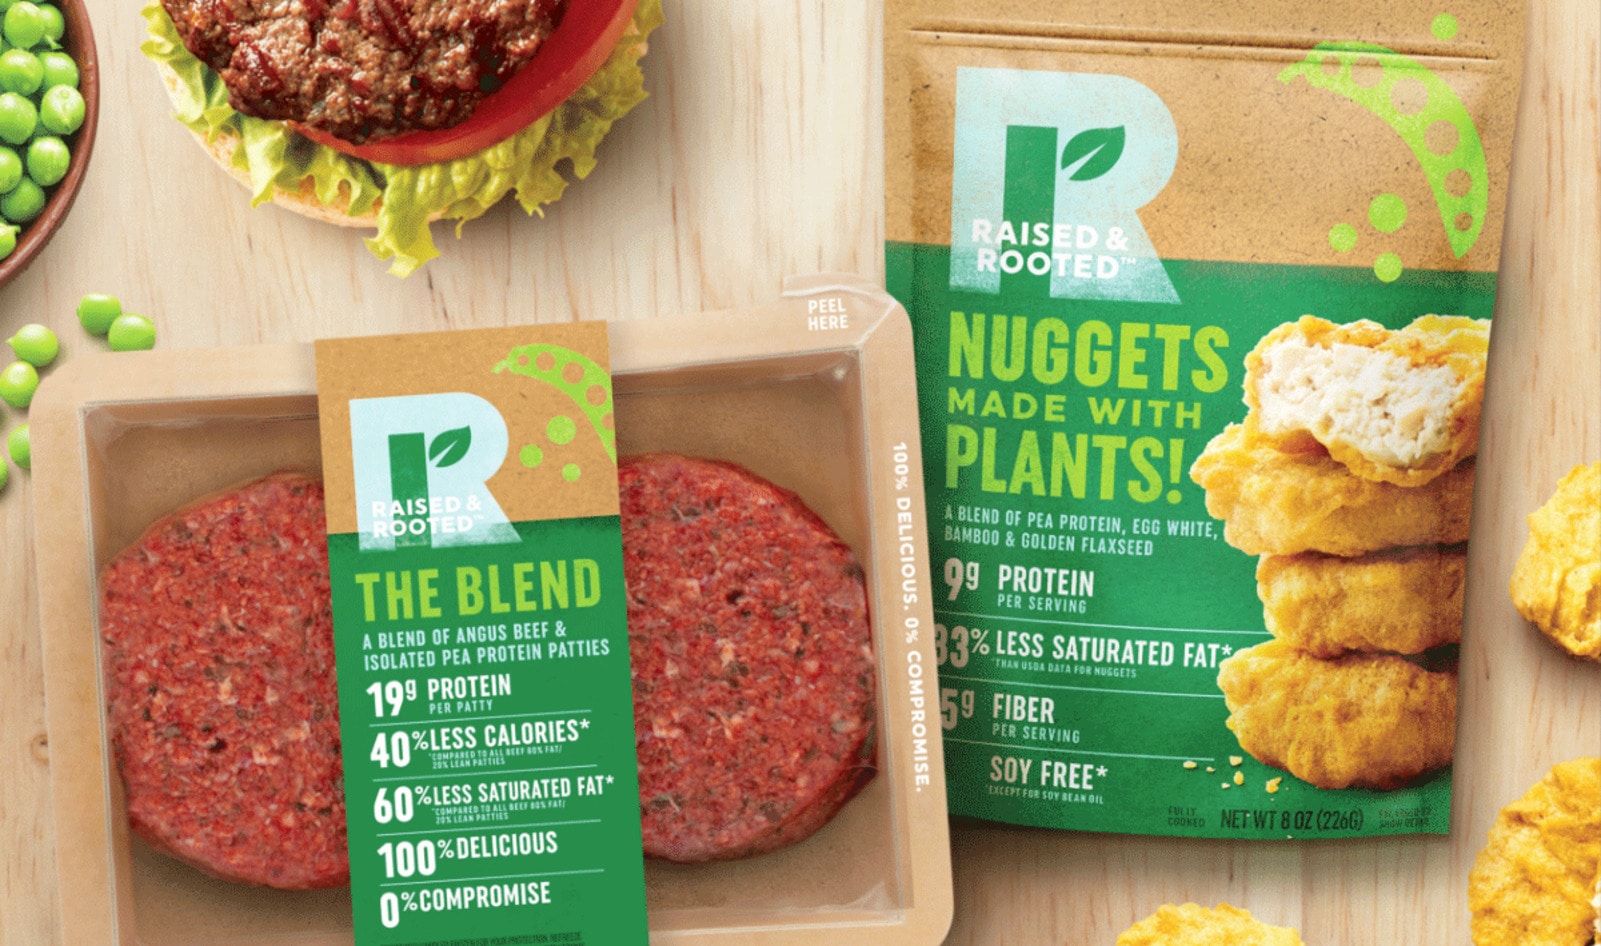 Tyson Drops Eggs from Its “Plant-Based” Nuggets, Discontinues “Half-Vegan” Blended Burger